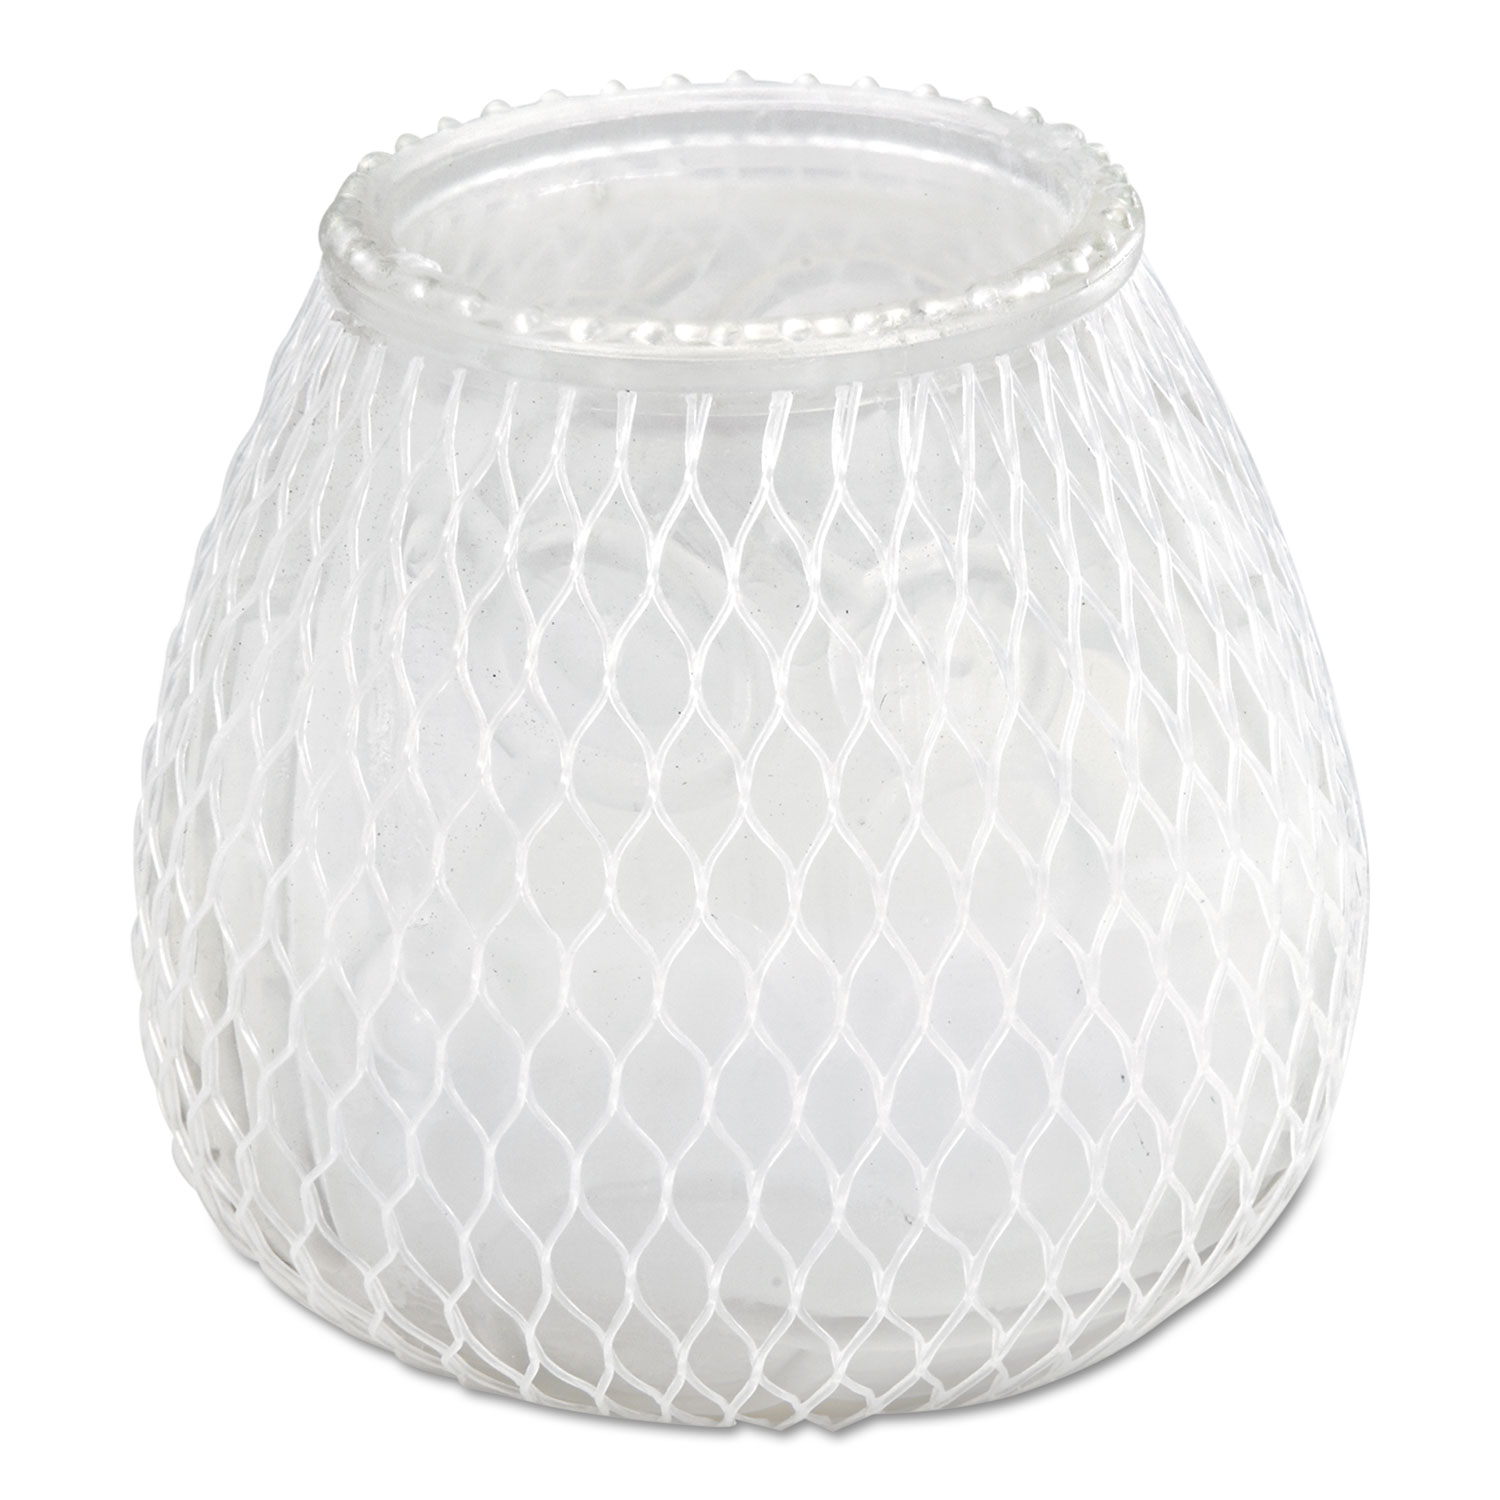  Sterno STE 40124 Euro-Venetian Filled Glass Candles, 60 Hour Burn, 3d x 3.5h, Frost White, 12/Carton (STE40124) 